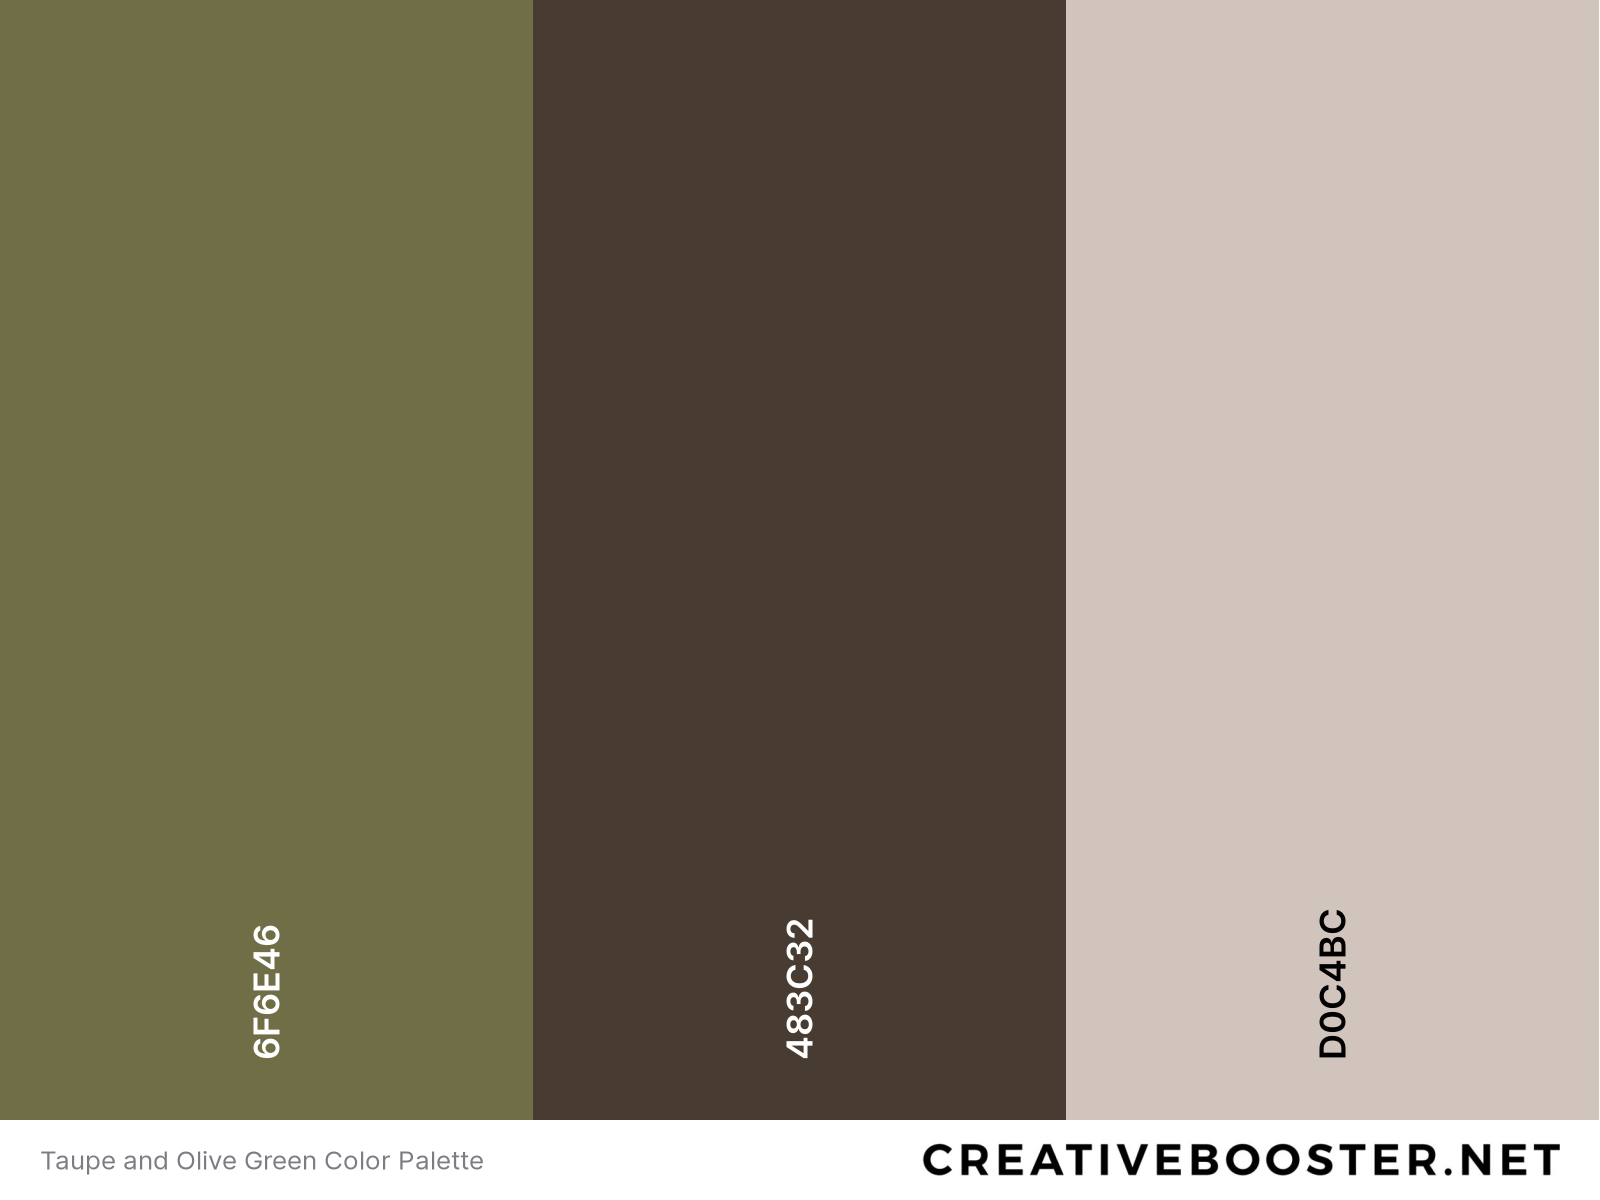 Taupe and Olive Green Color Palette